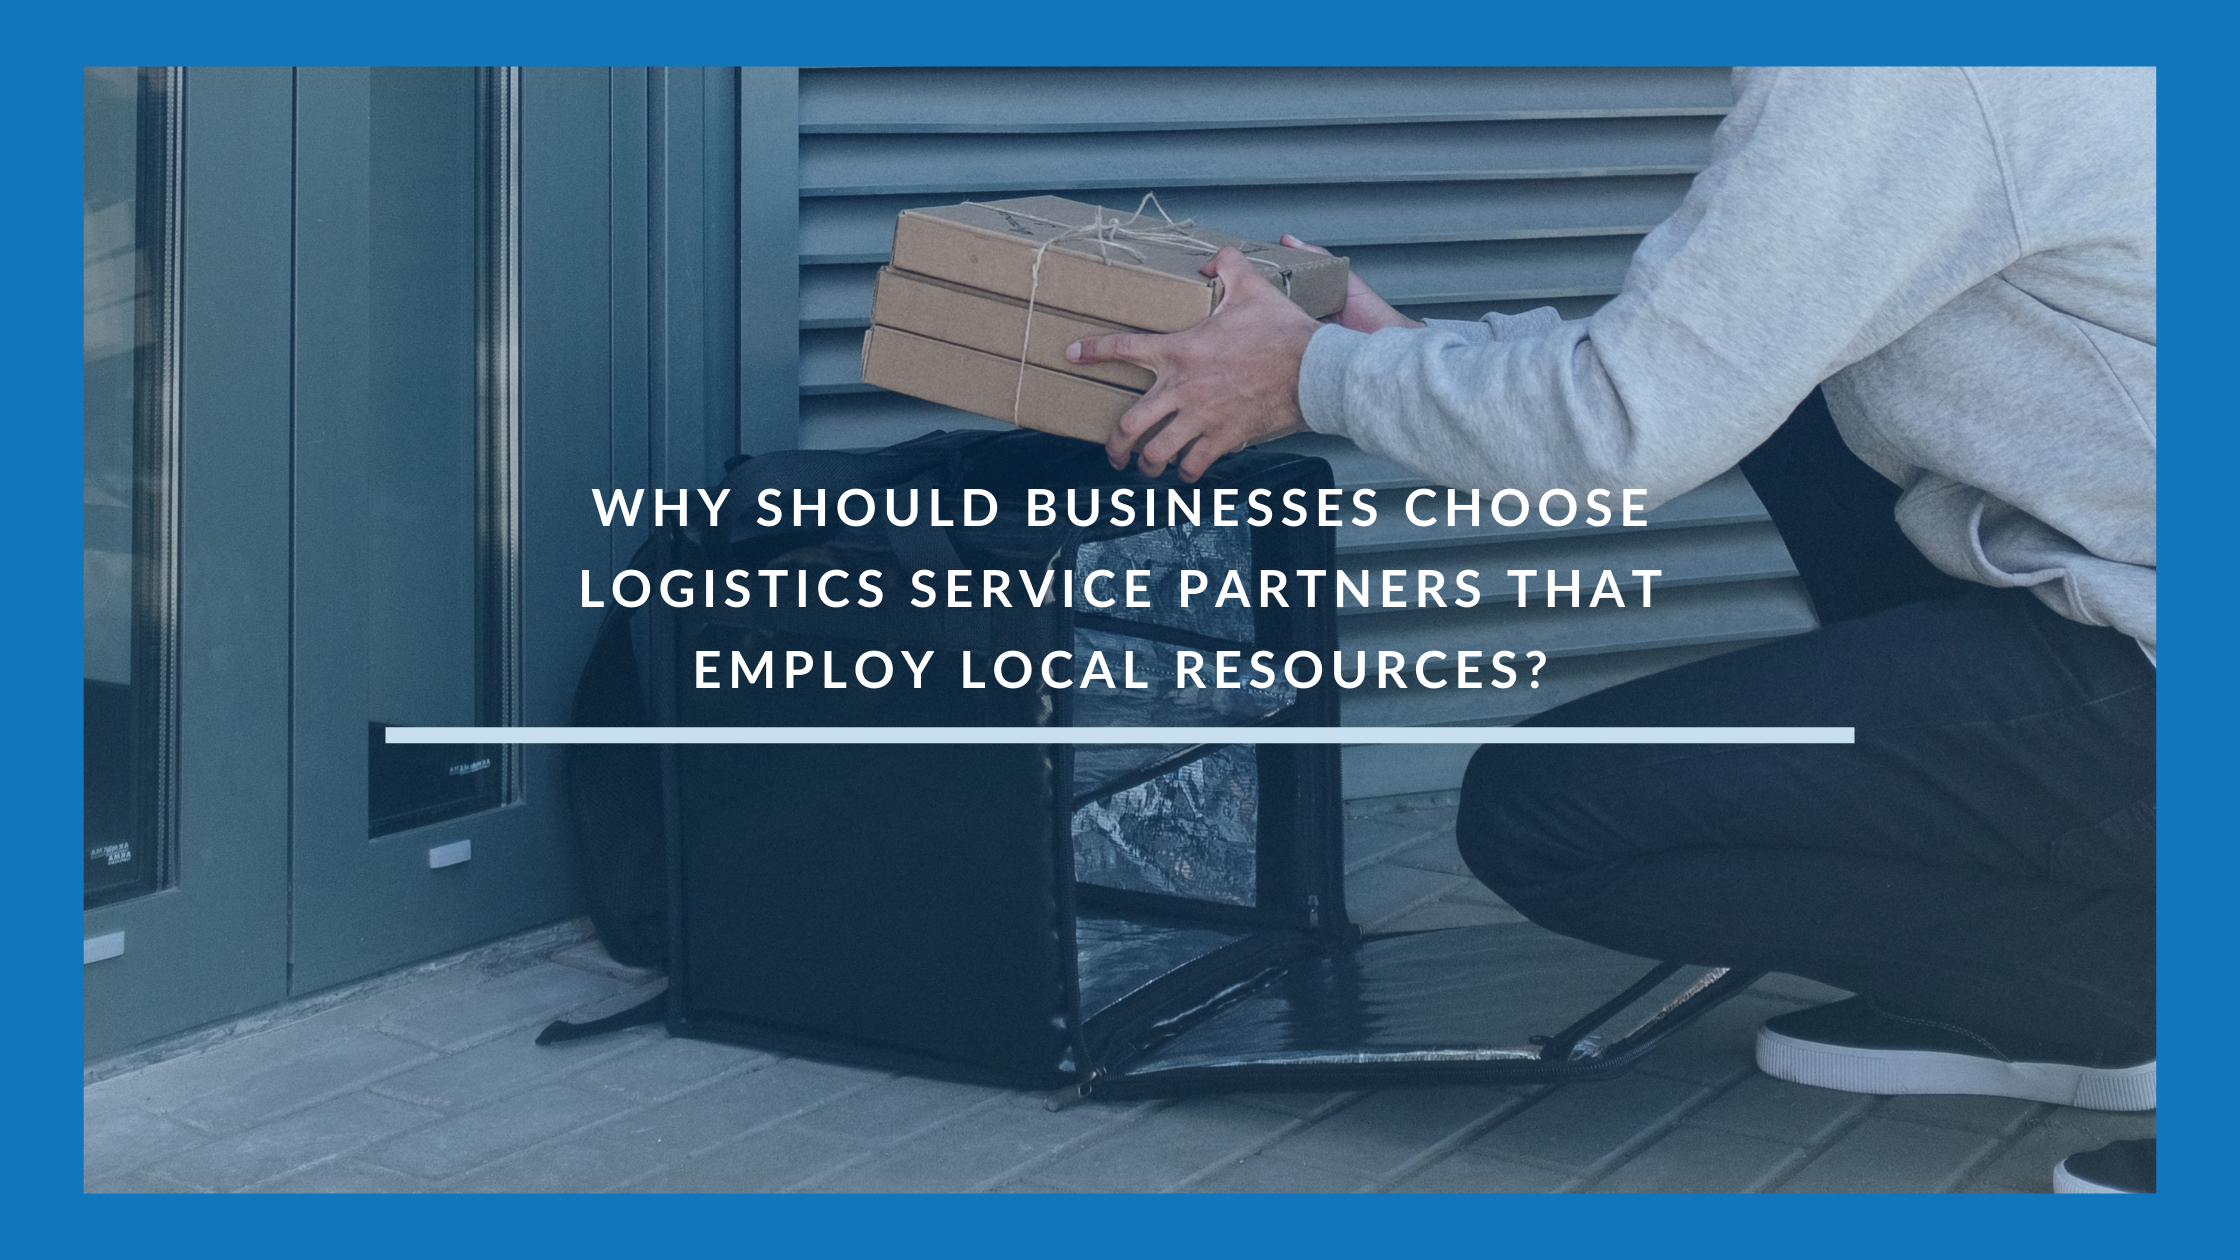 Why should businesses choose logistics service partners that employ local resources